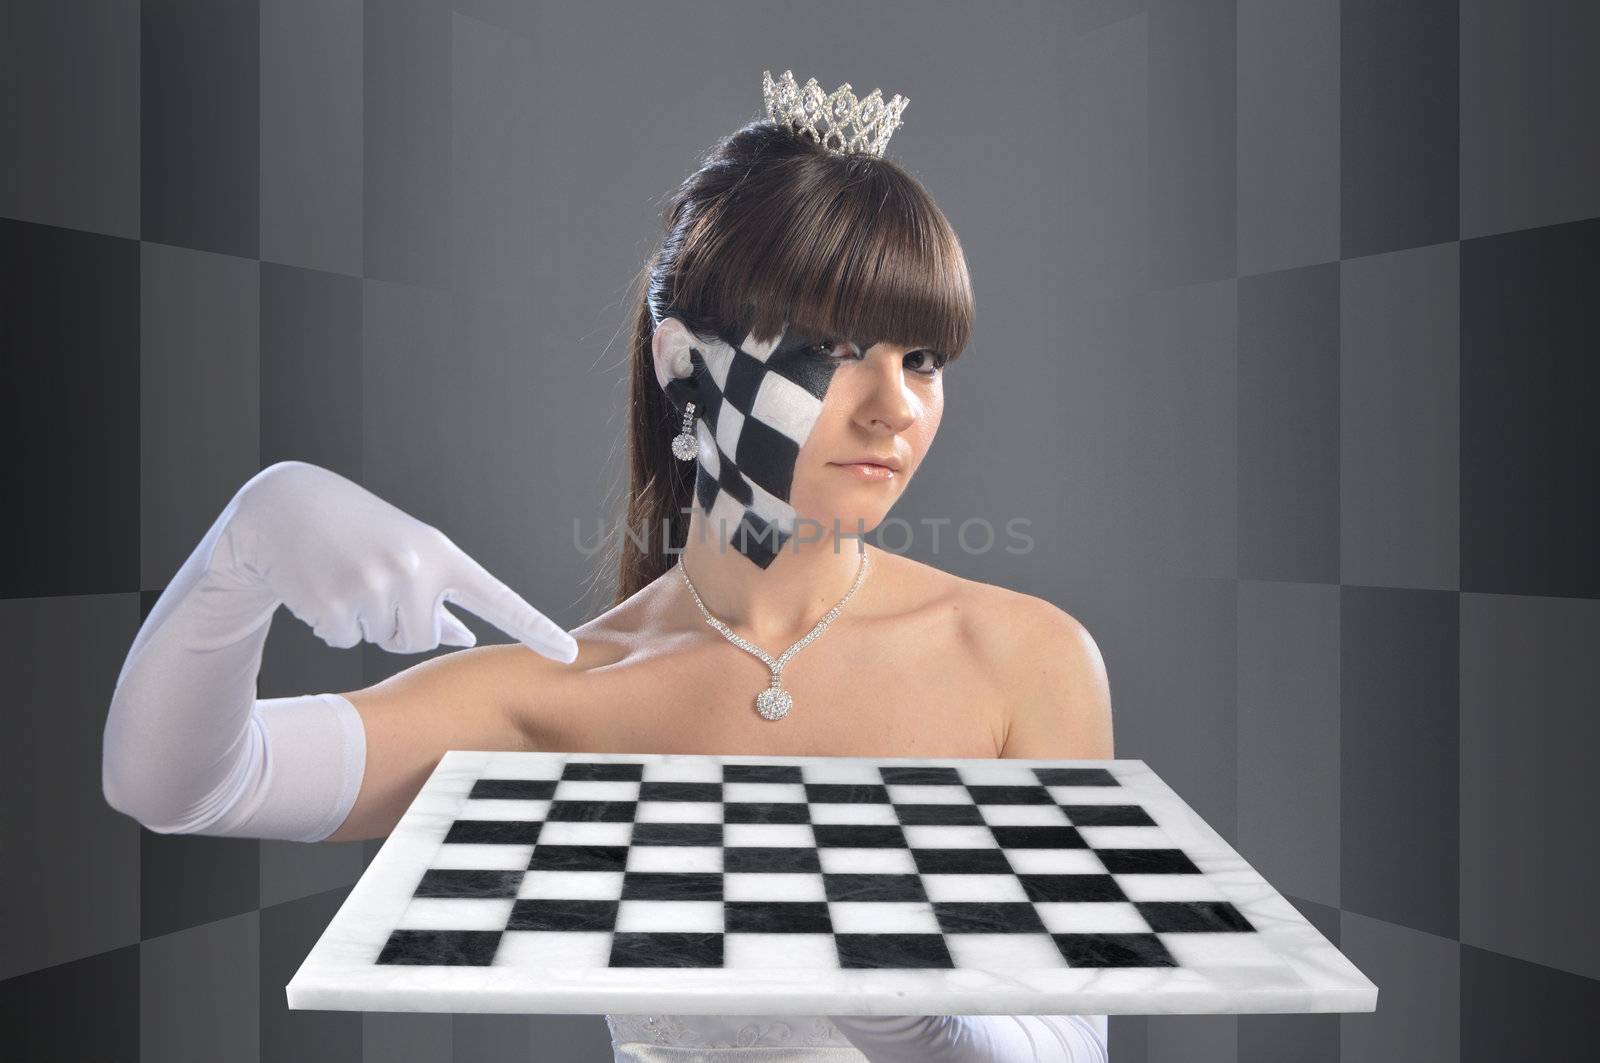 The girl in the image of the chess queen points to something on the chessboard, which she keeps